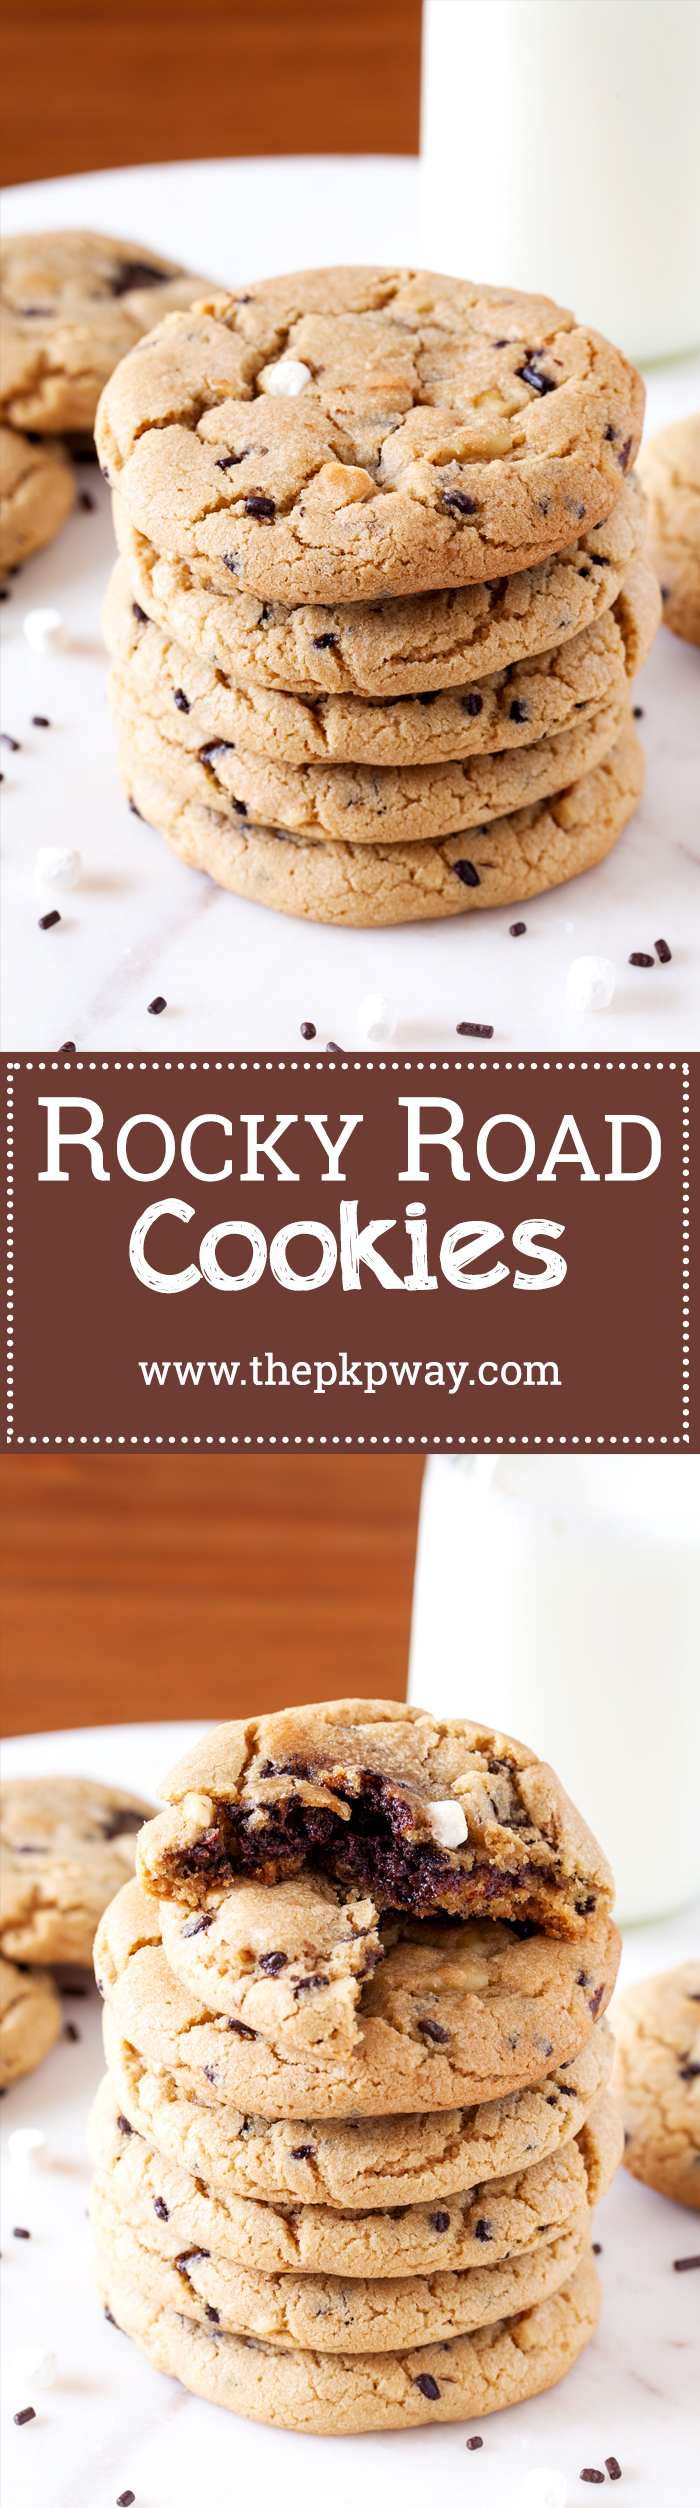 Rocky road reincarnated in cookie form. Full of marshmallows and walnuts, these cookies are soft, chewy, and gushing with rich ganache.